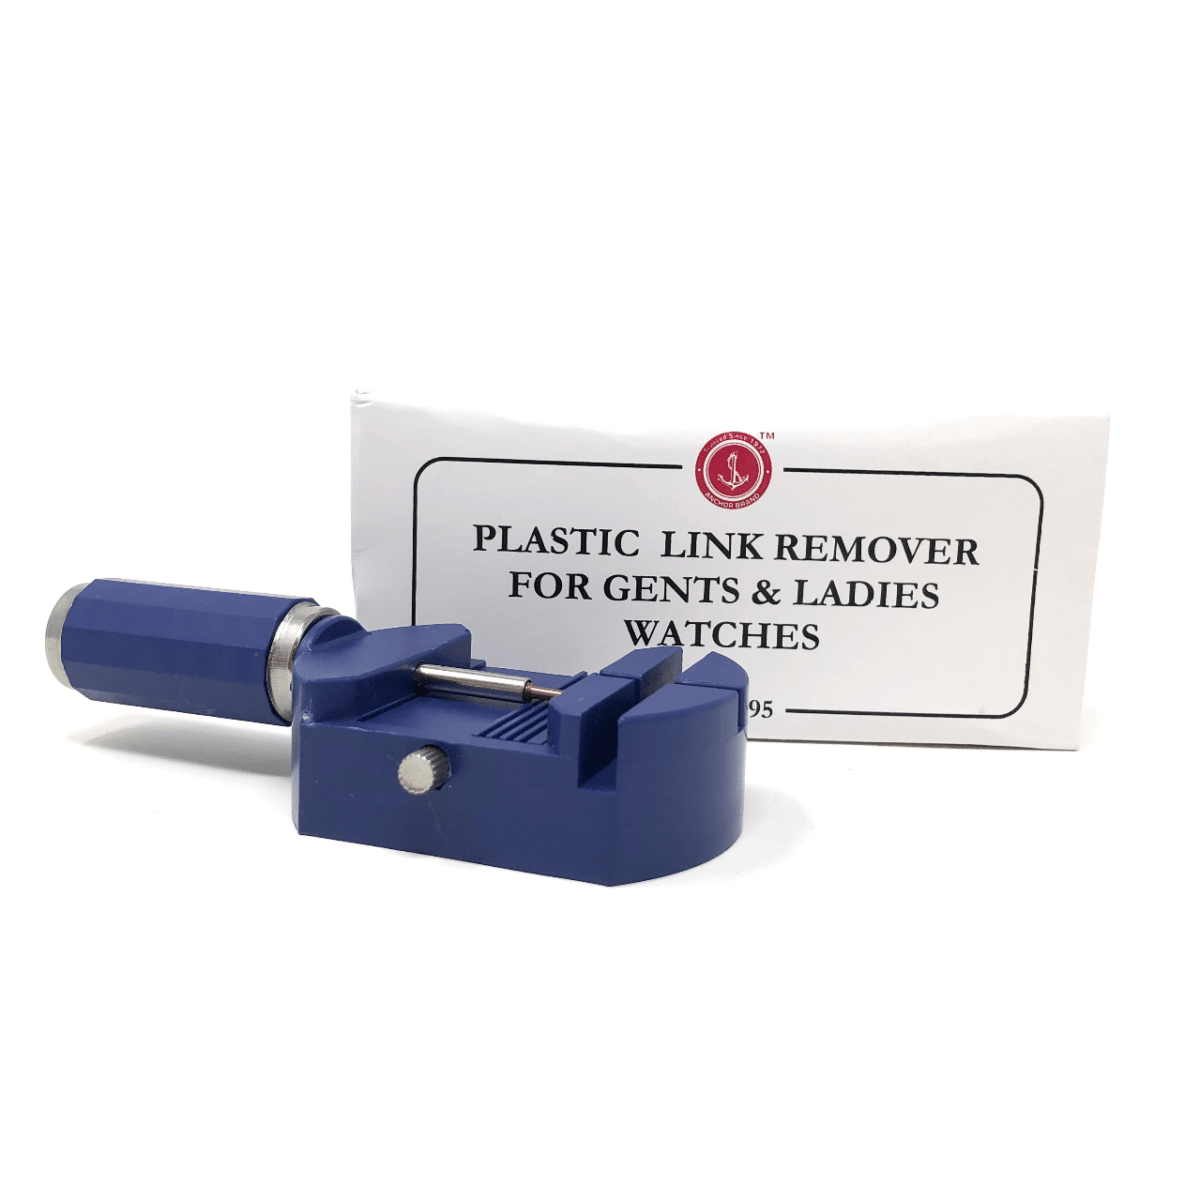 Watch Link Remover Removes Pins Watchmaker Tool Bracelet Repairs Blue Plastic 194343407432 5 - Maddisons UK